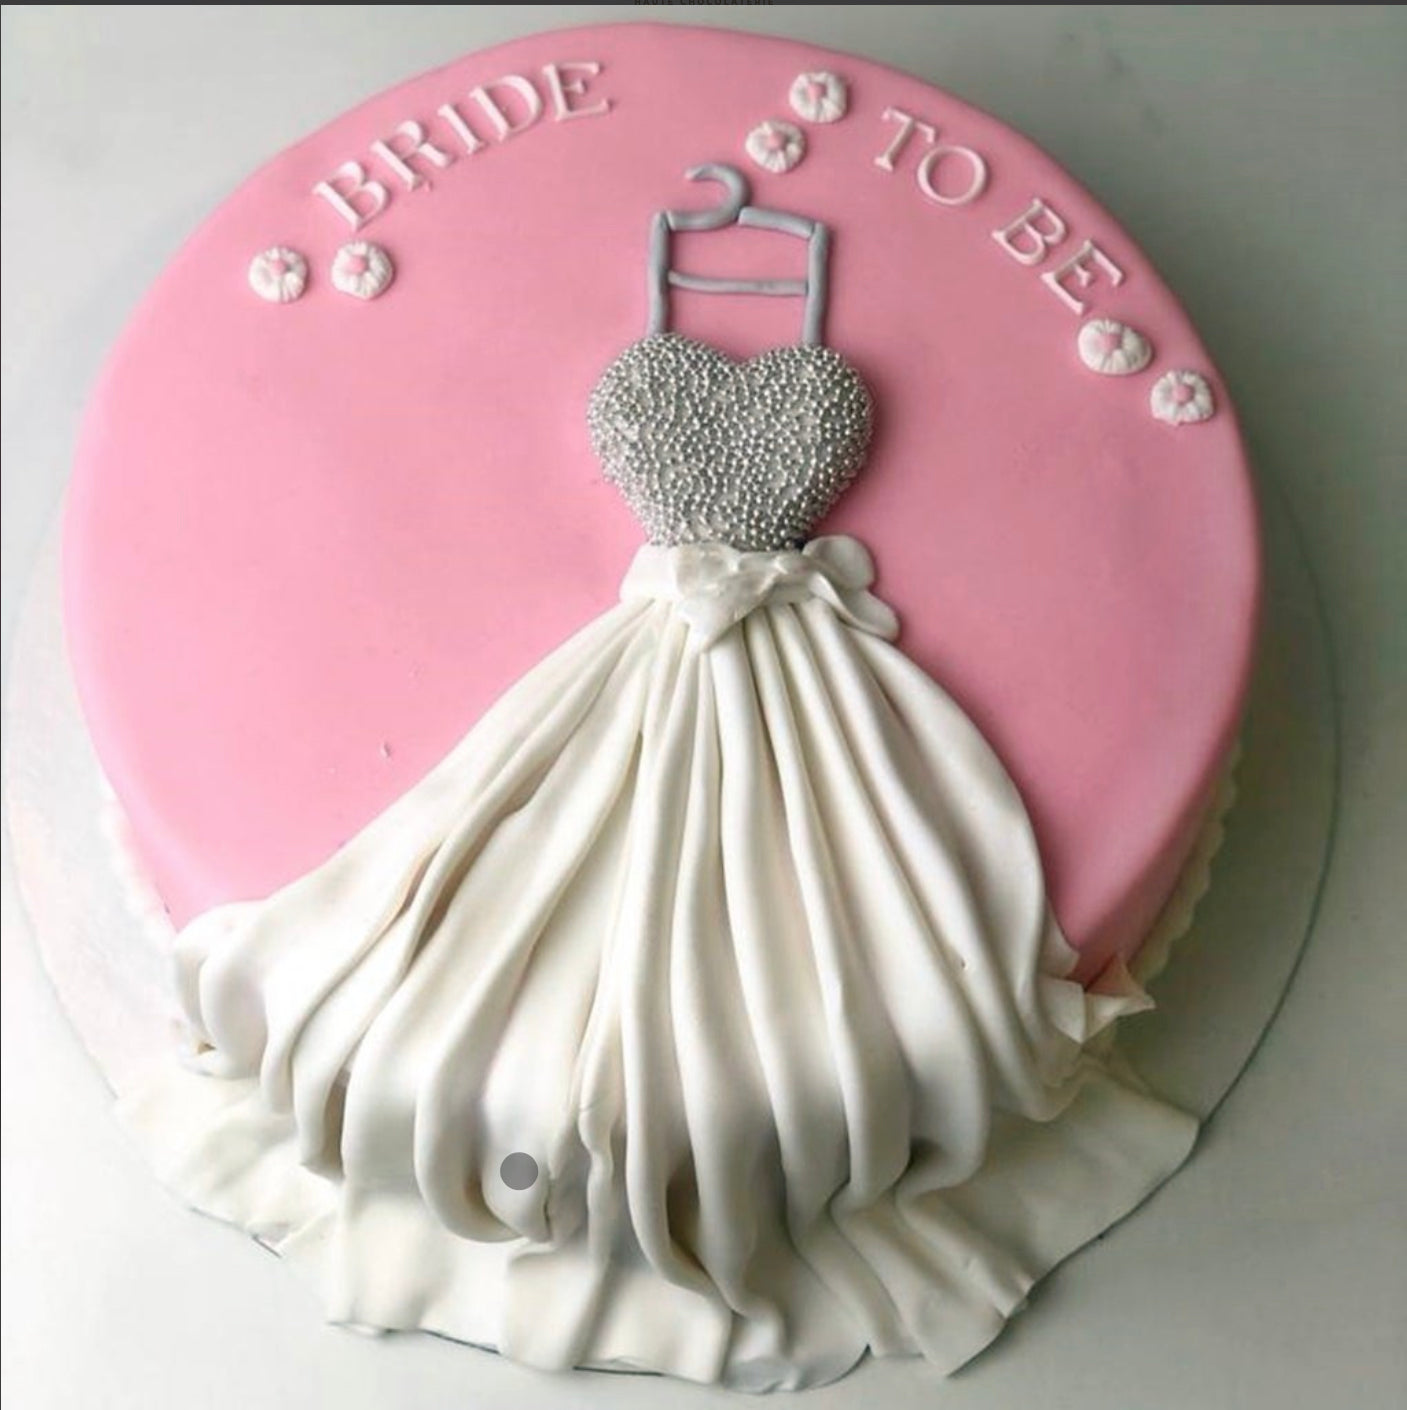 Rose Gold Mirror 'Bride To Be' Wedding Cake Topper - Online Party Supplies